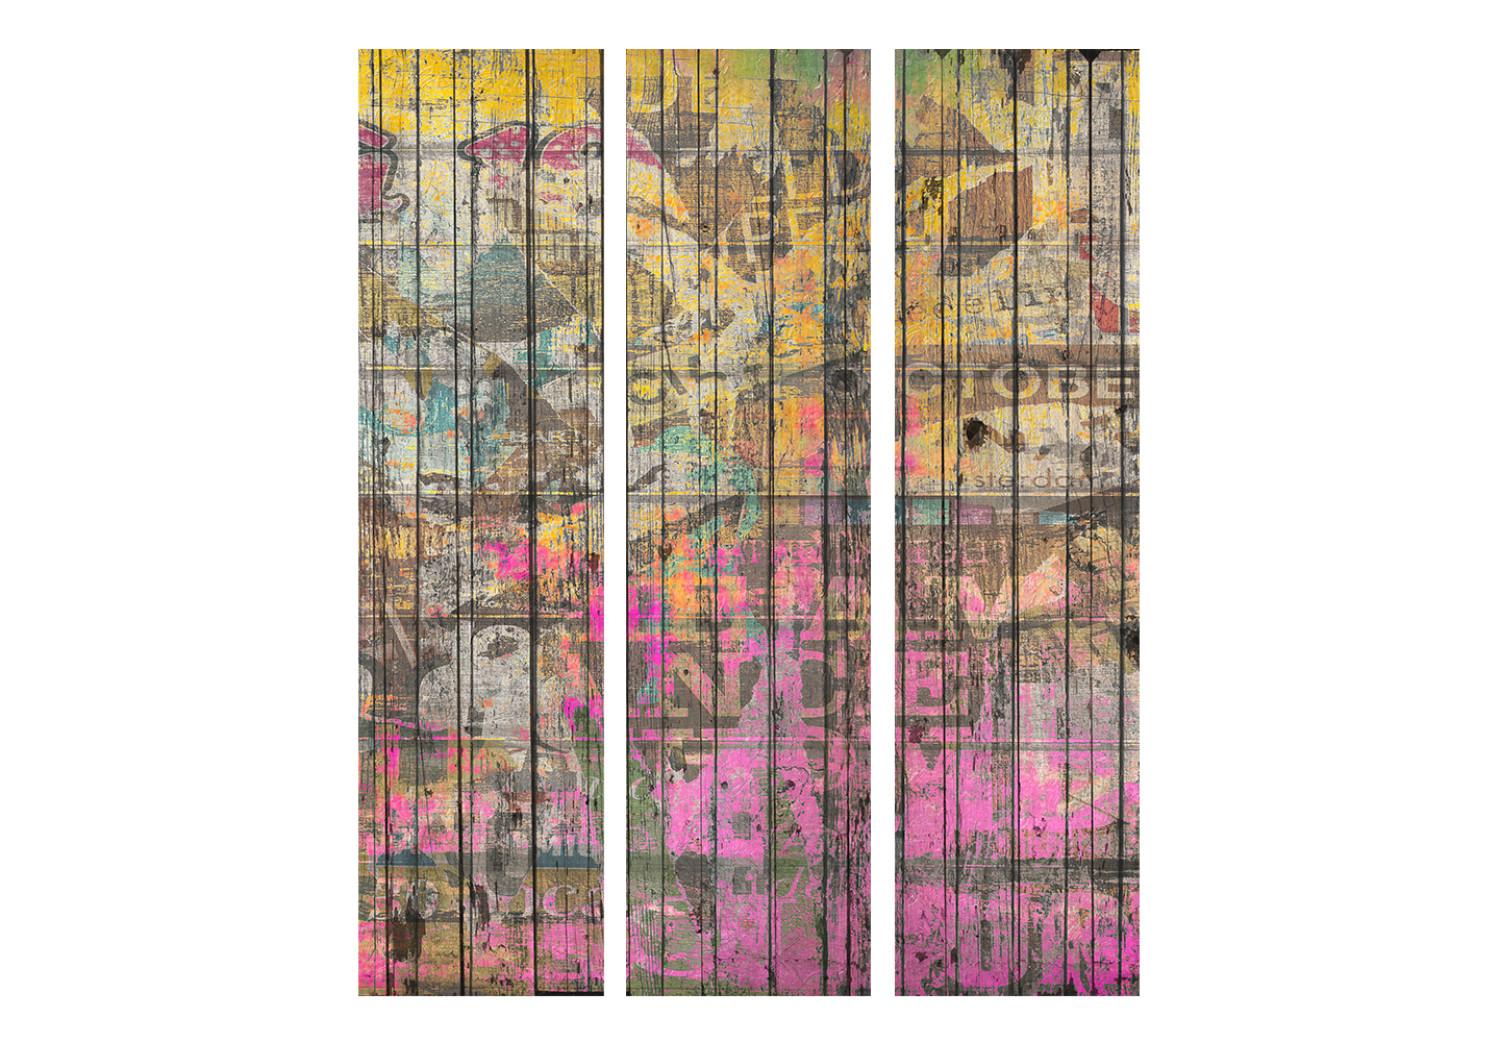 Room Divider Freestyle - texture with colorful and abstract graffiti-style patterns